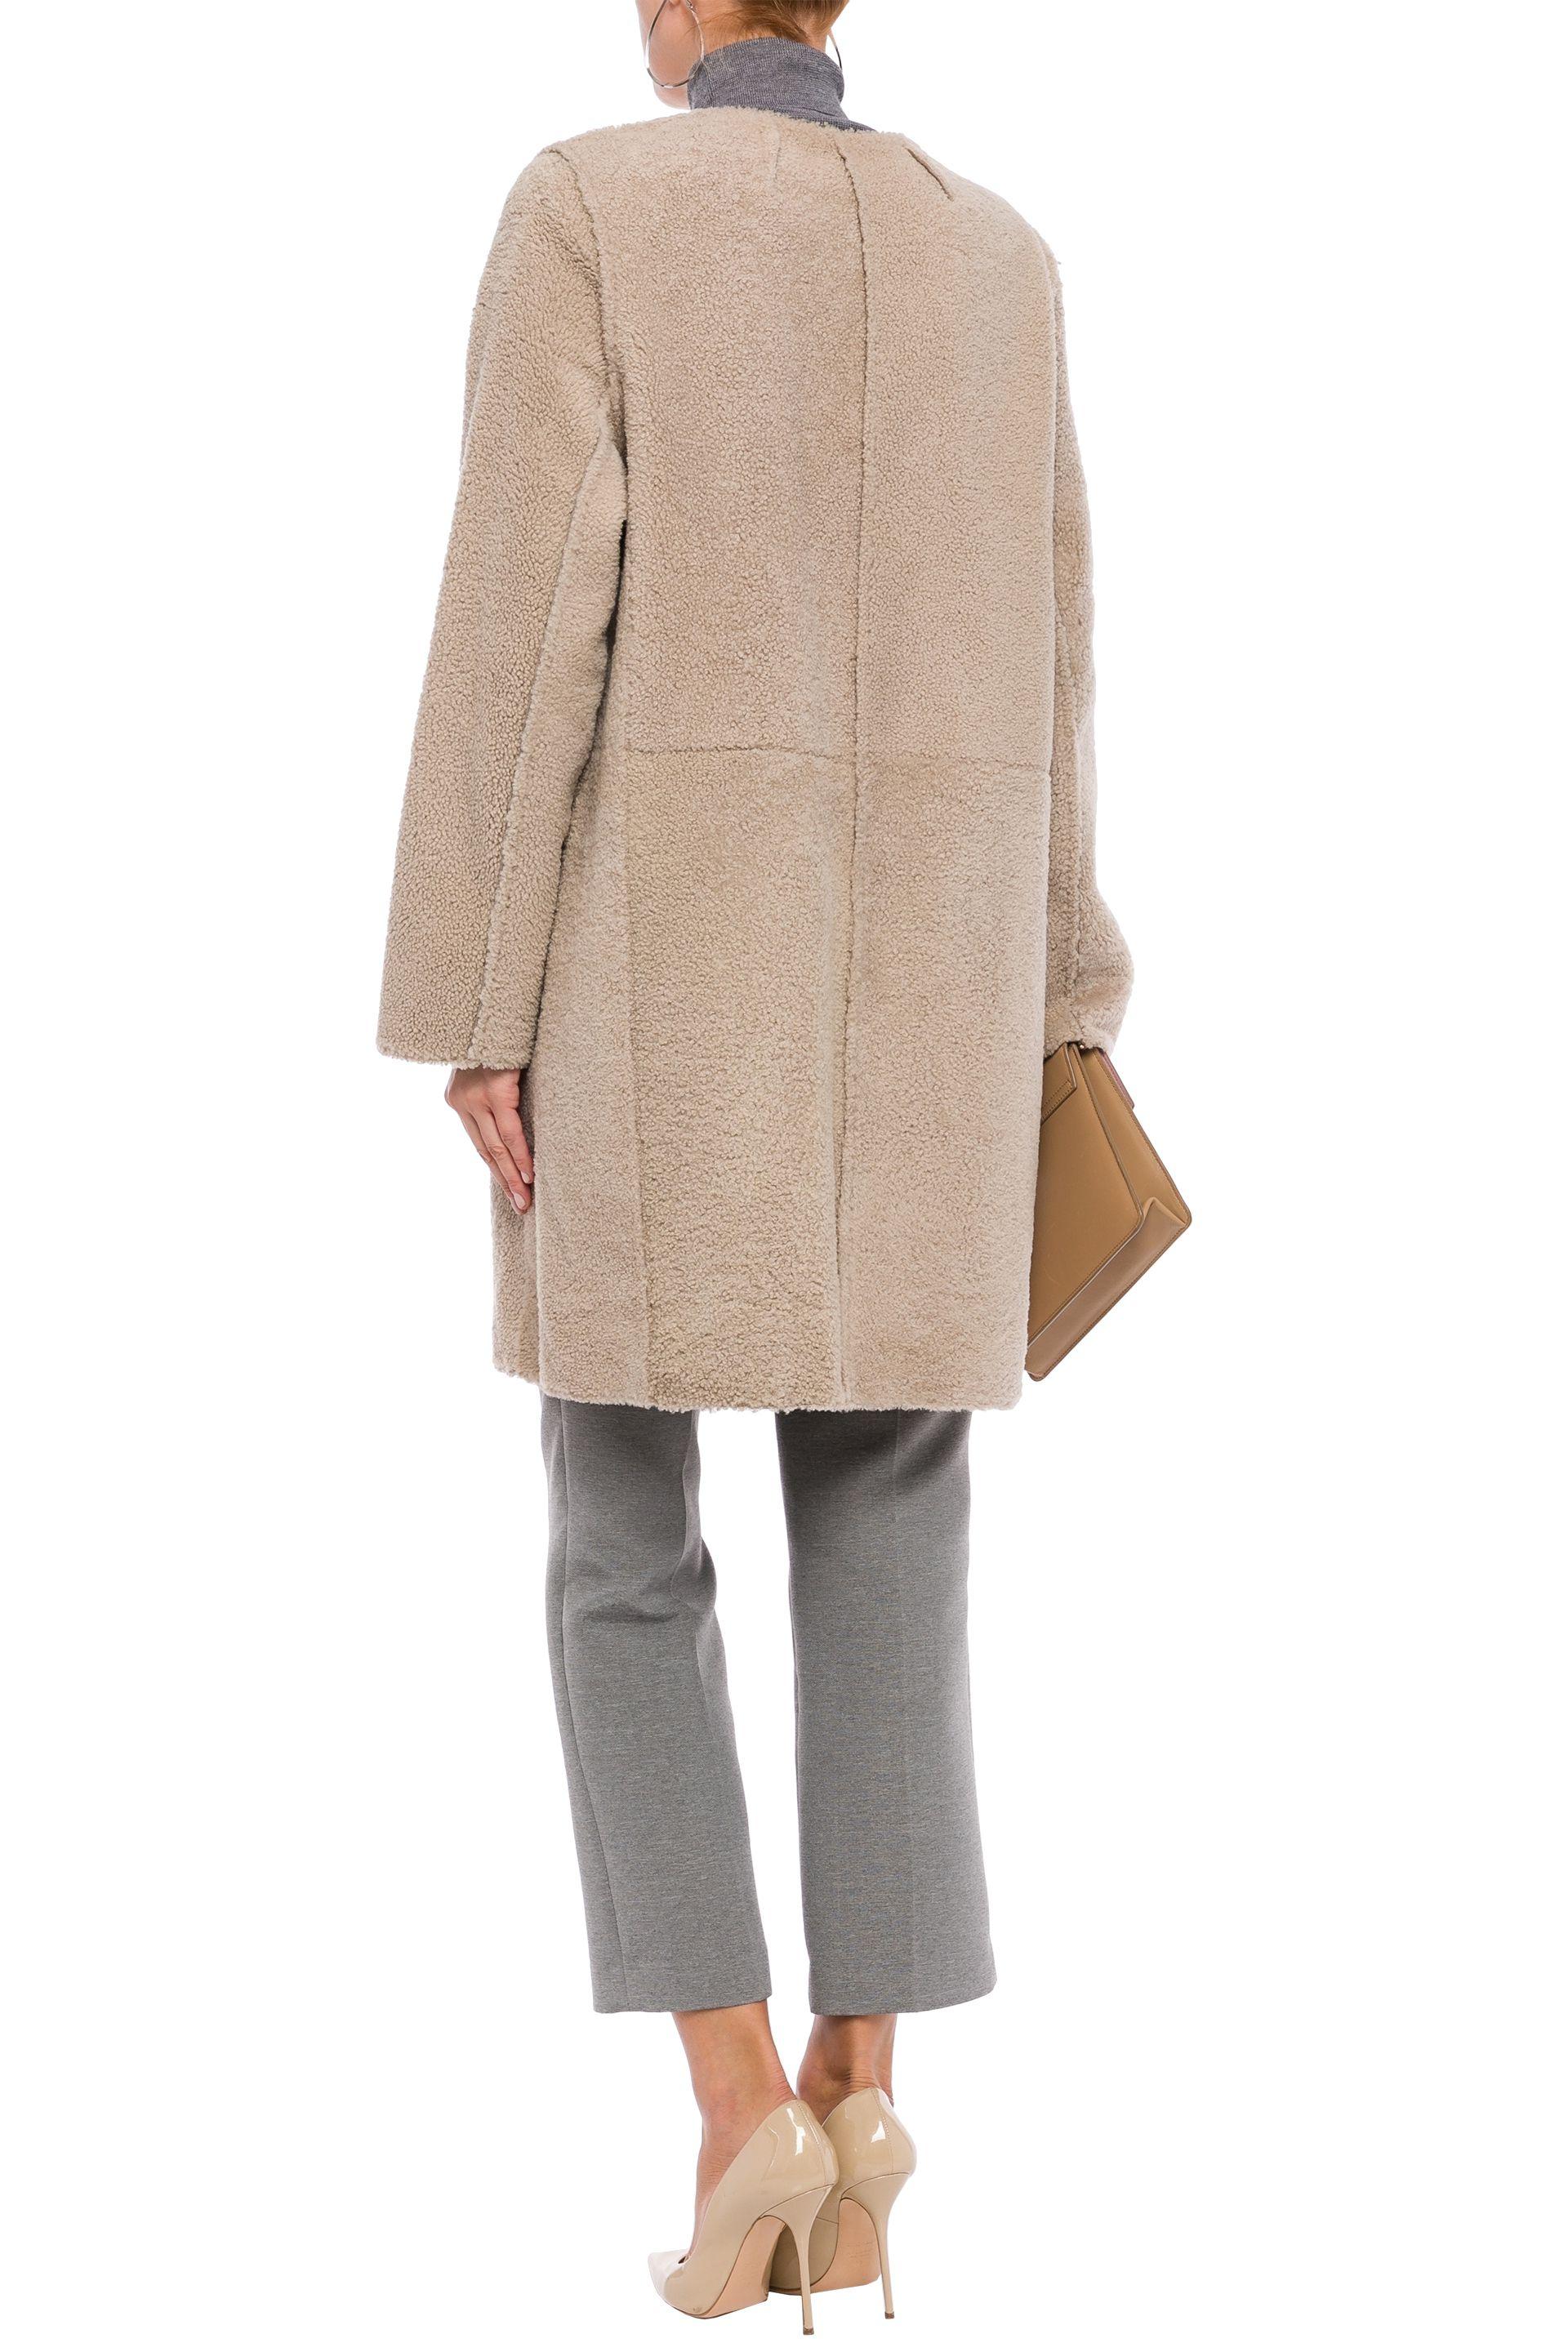 Yves Salomon Leather Reversible Shearling Coat Cream in Natural - Lyst